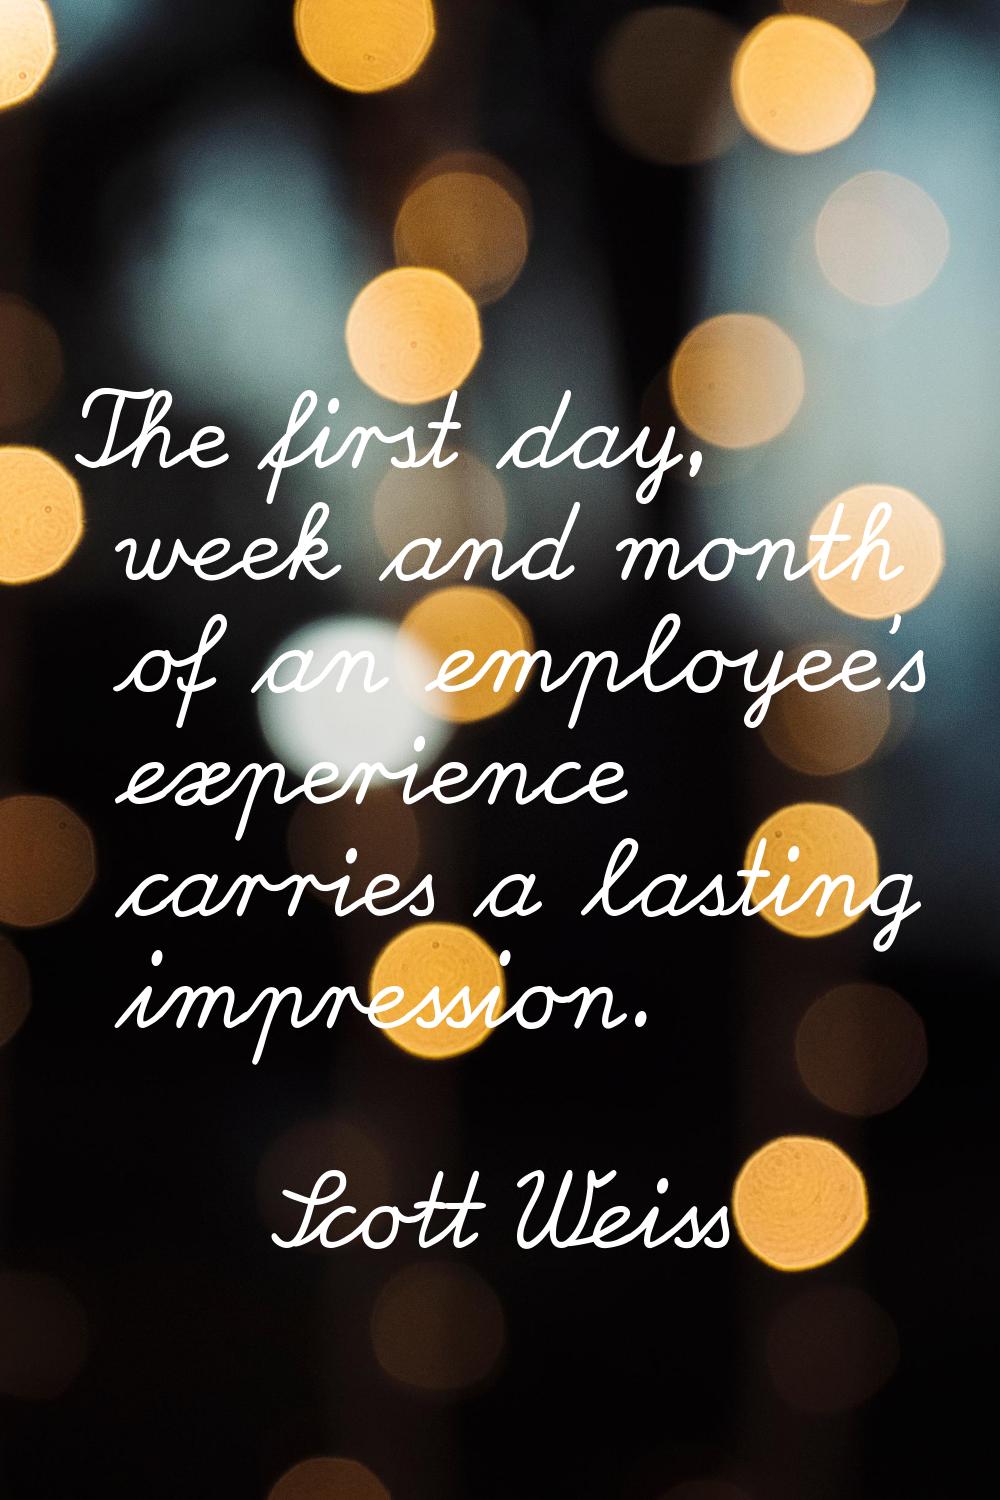 The first day, week and month of an employee's experience carries a lasting impression.